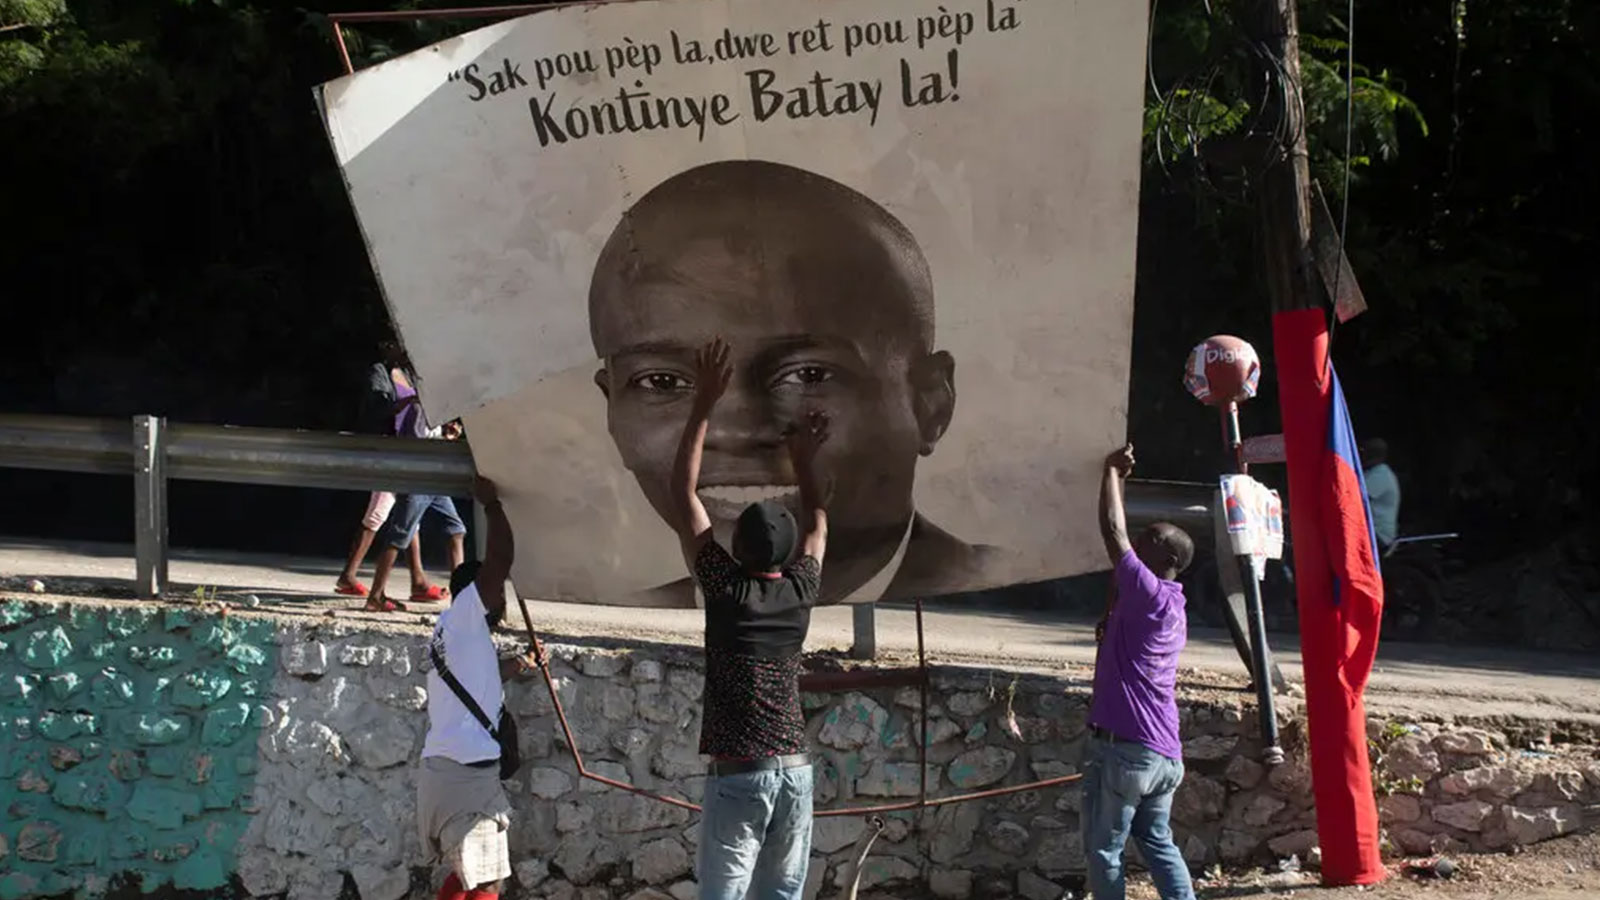 A poster in support of Jovenel Moïse, the former president of Haiti, who was assassinated last July. 